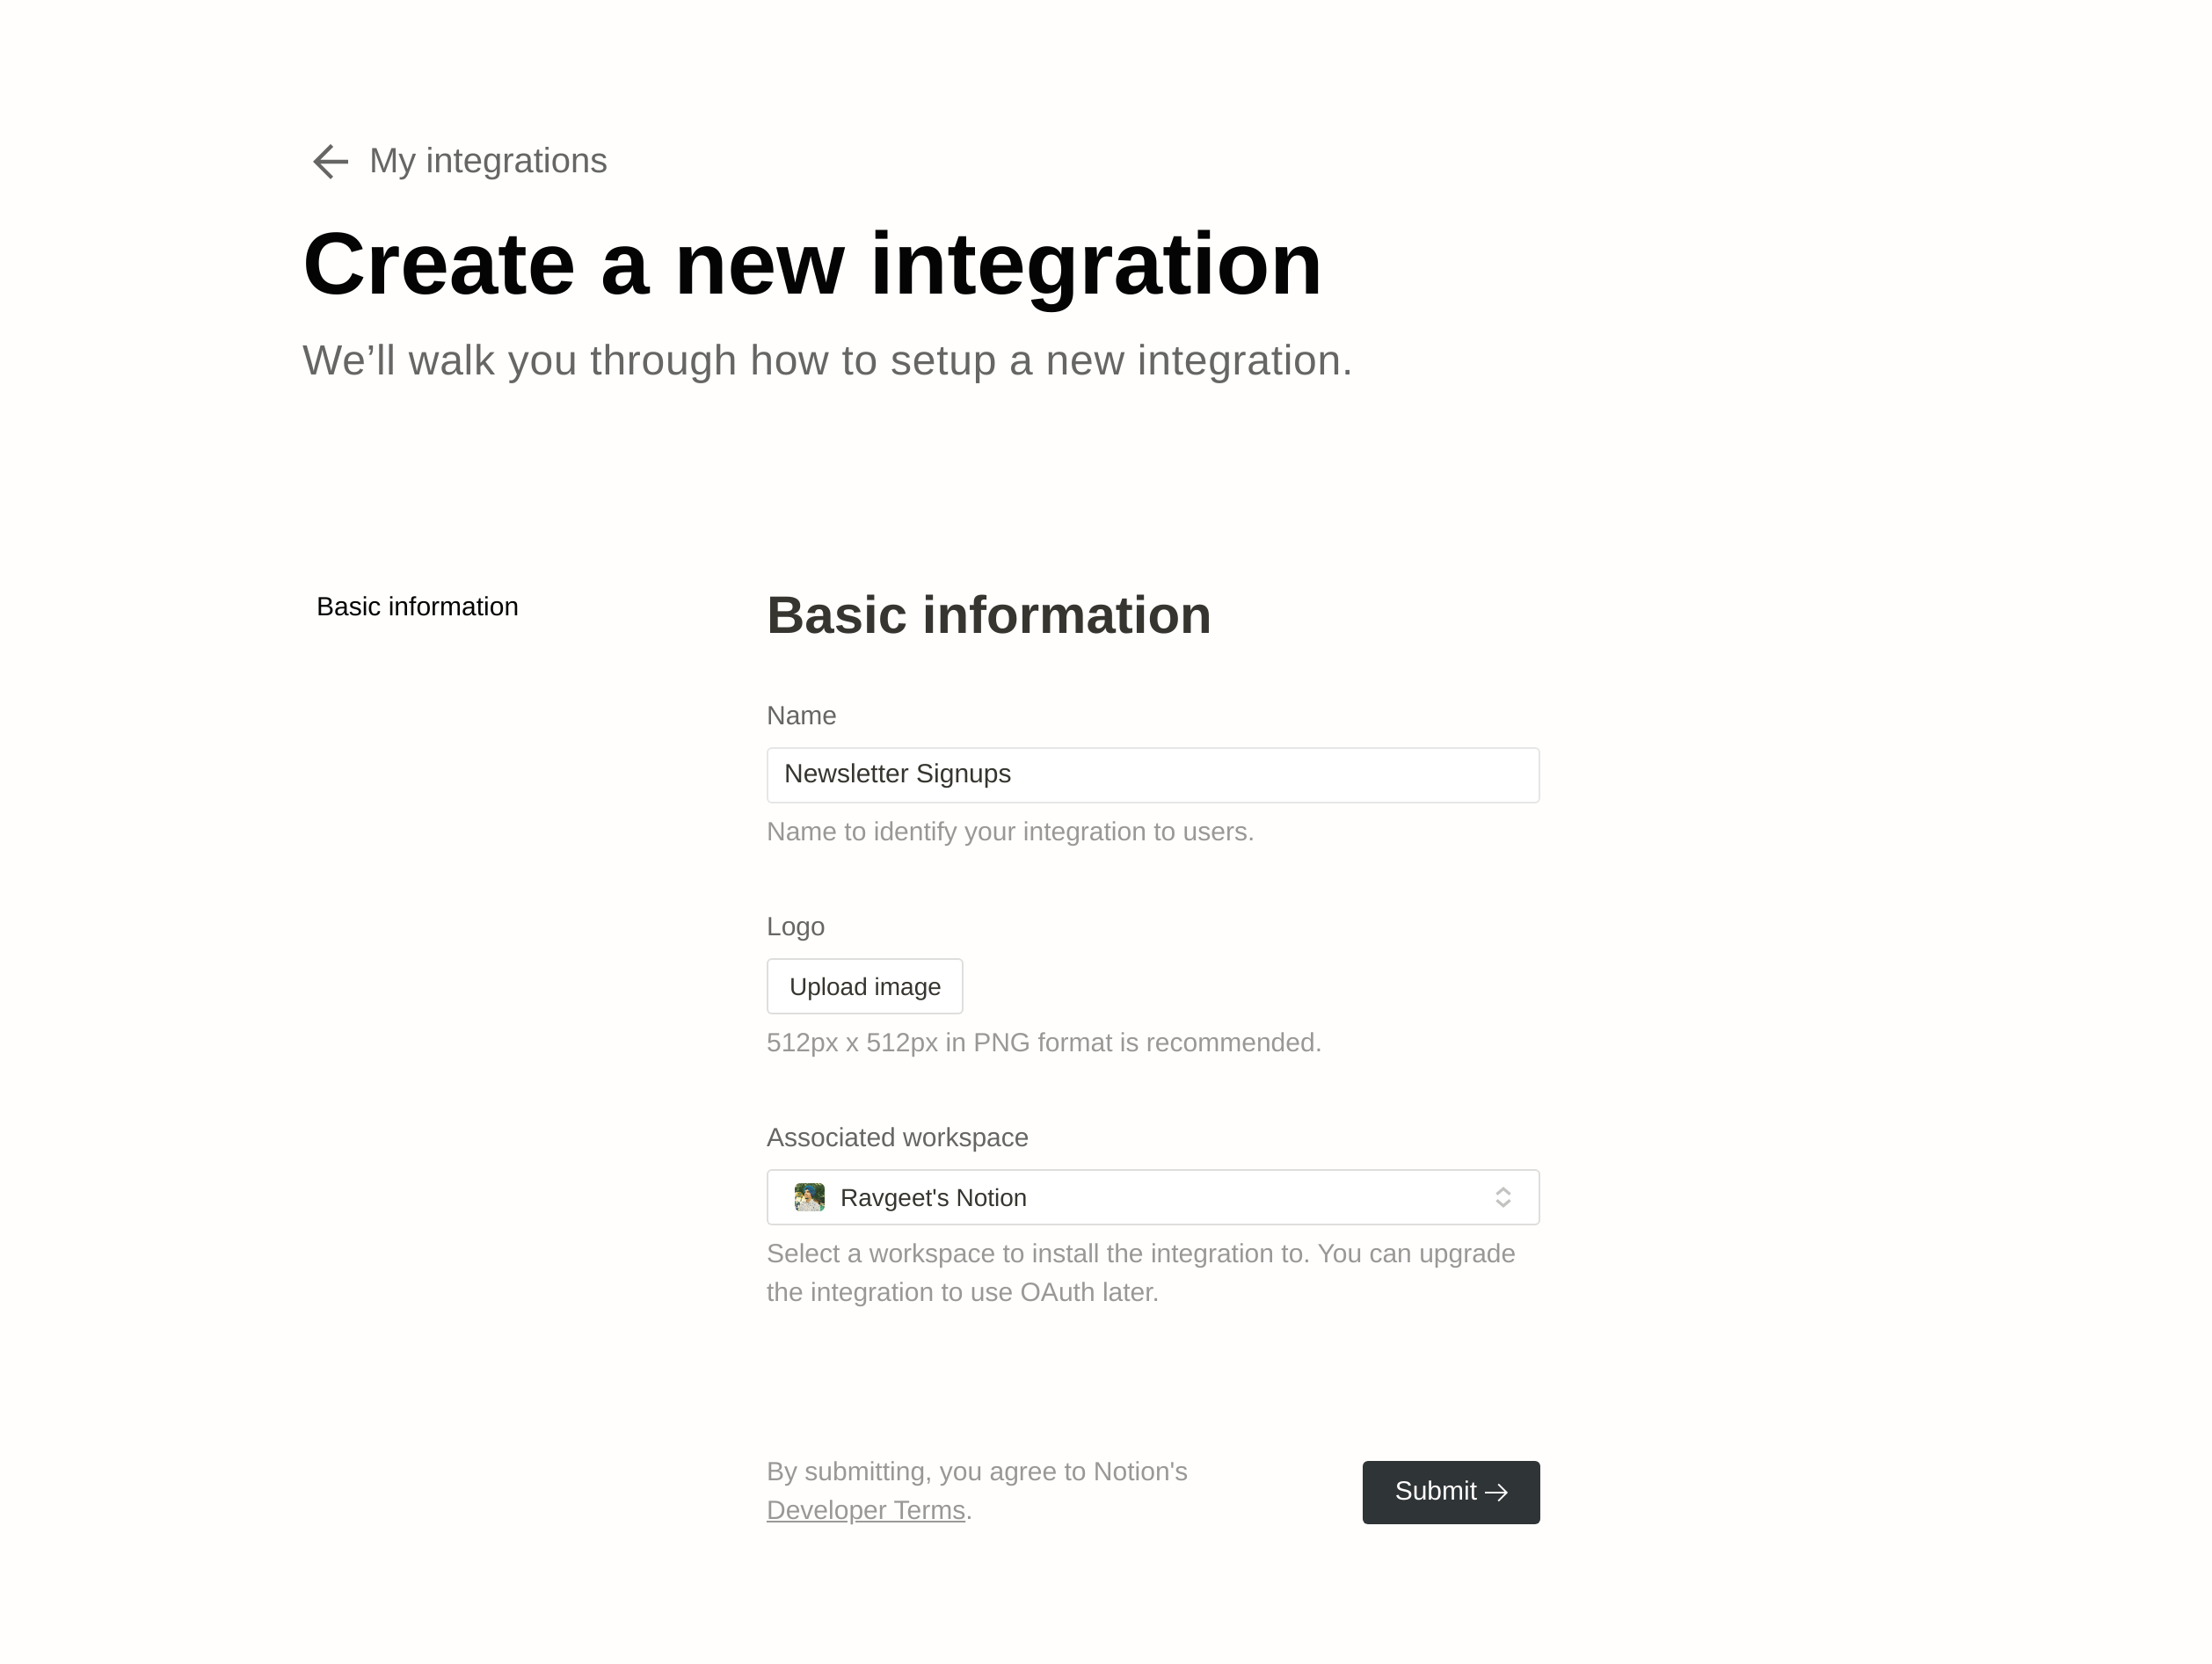 A plain white webpage for Notion integrations. It has a heading that says Create a new integration with form fields for name, logo, associated workspace, and a submit button.